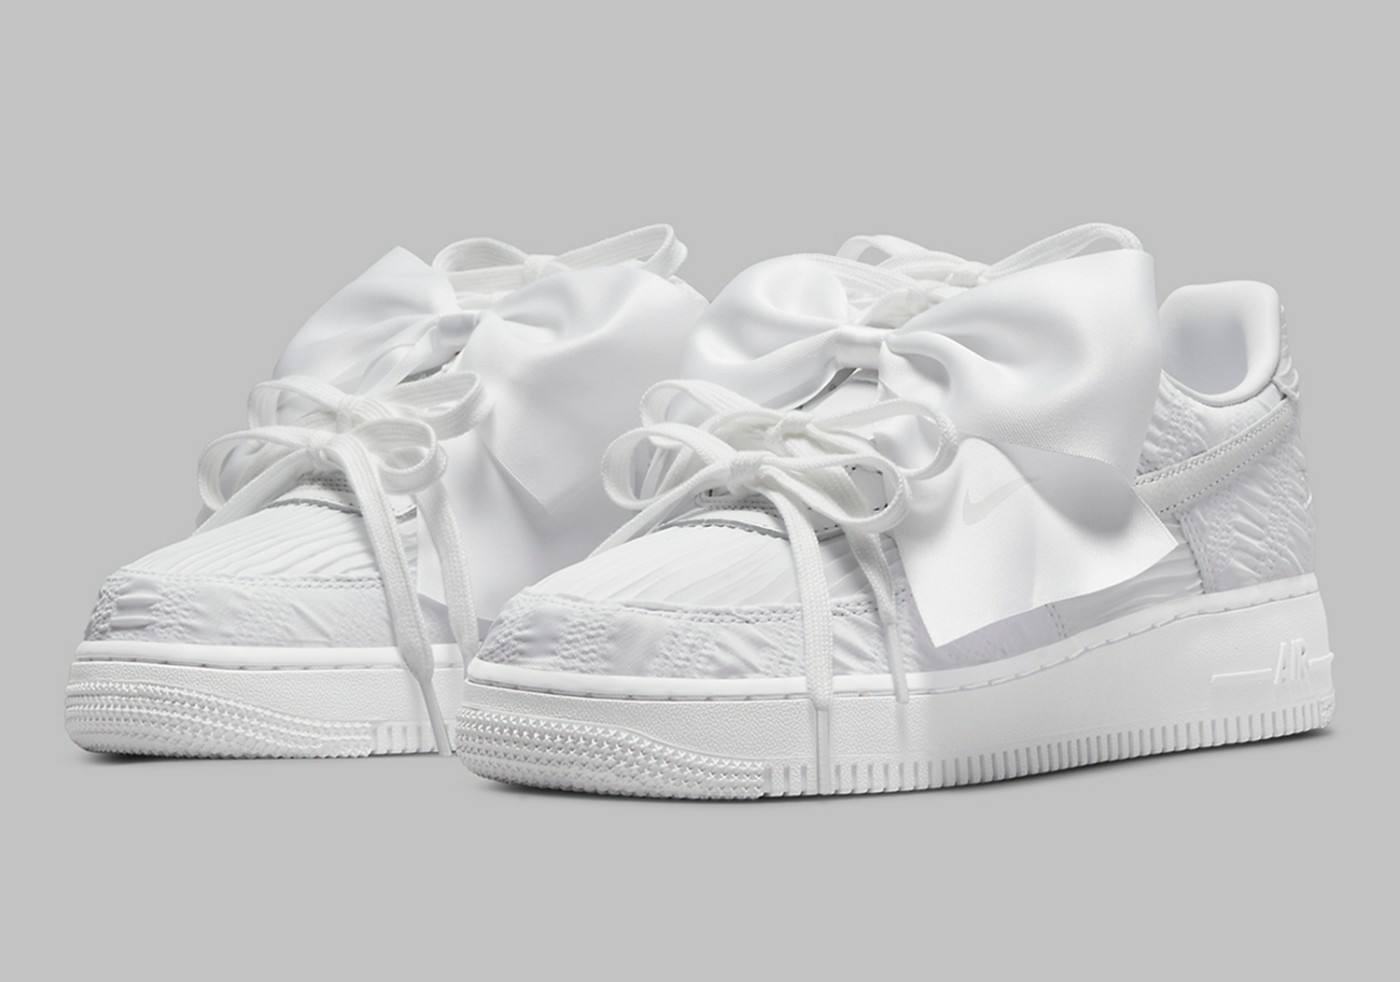 Nike,Air Force 1 Low  少女心拉满！全新 Air Force 1 Low 真太可爱了！